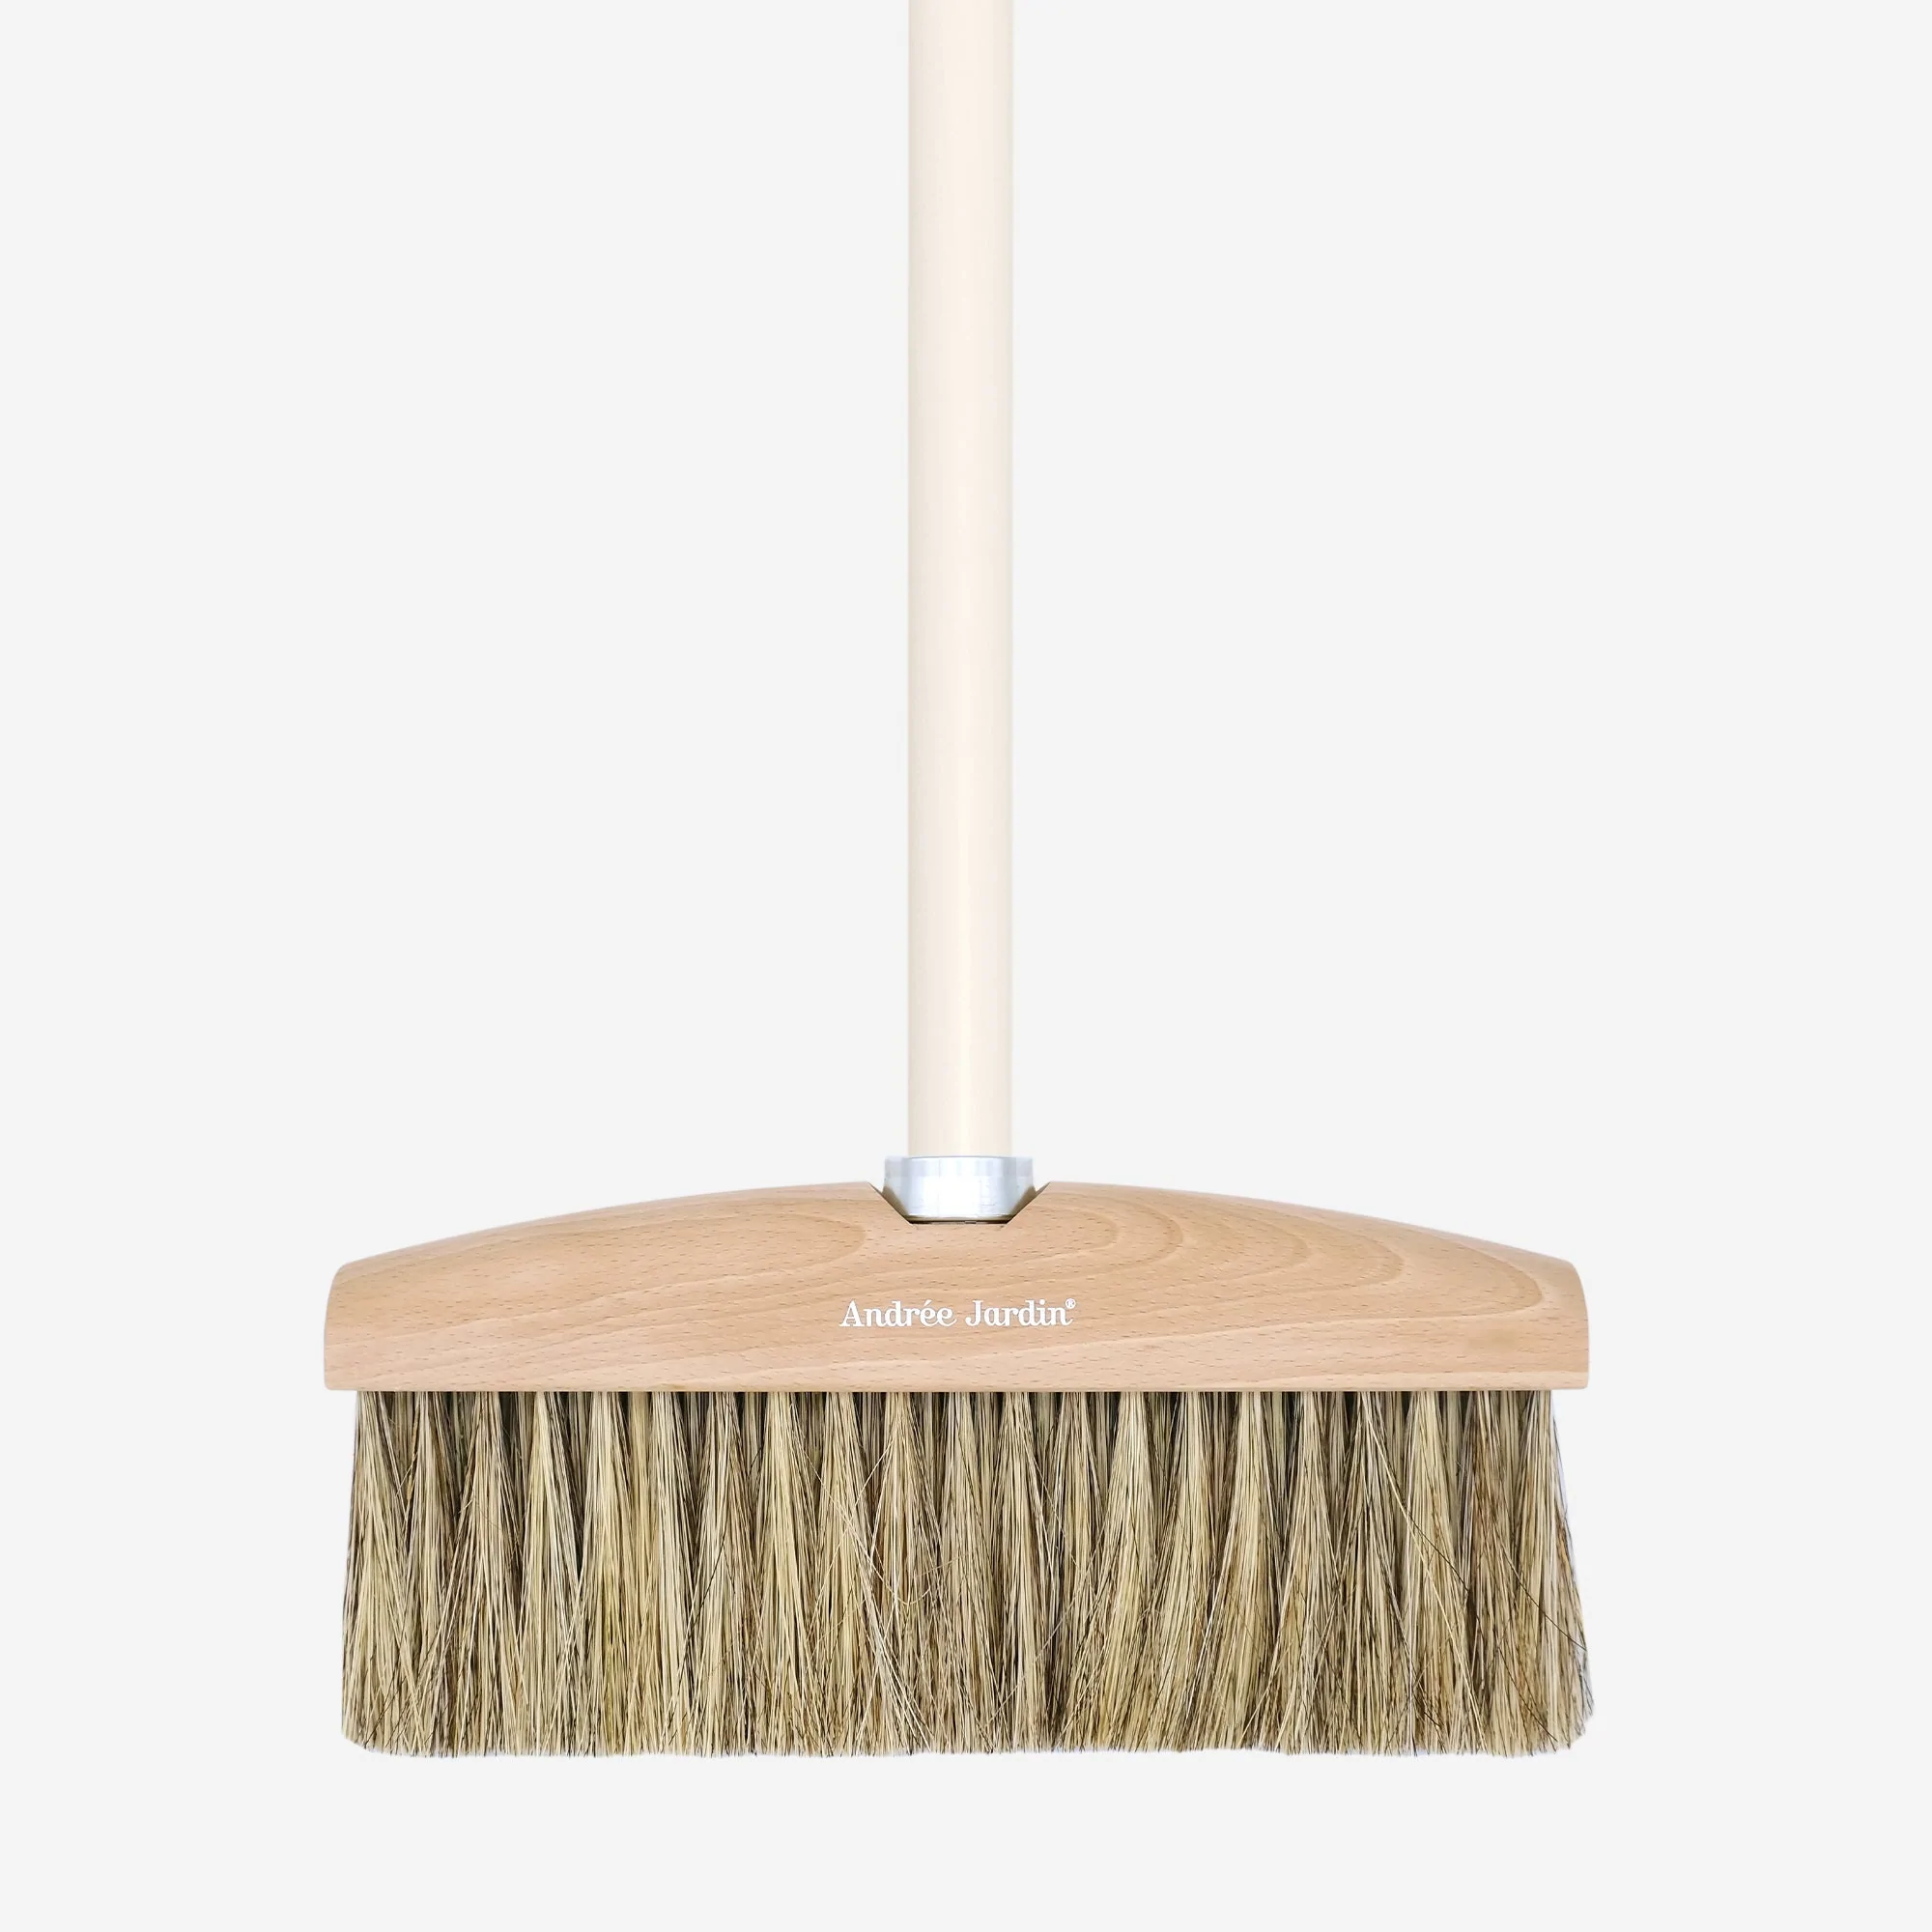 Andrée Jardin Mr. and Mrs. Clynk Natural Broom Head Broom Heads Andrée Jardin Brand_Andrée Jardin Home_Broom Sets Home_Household Cleaning La Maison Summer Clean Up balai-clynk-nature-3102-blanc2_AndreeJardinMr.andMrs.ClynkNaturalBroomHead_2000x2000_1d9ad2e7-43e0-4693-bf08-cd14aaa65e87